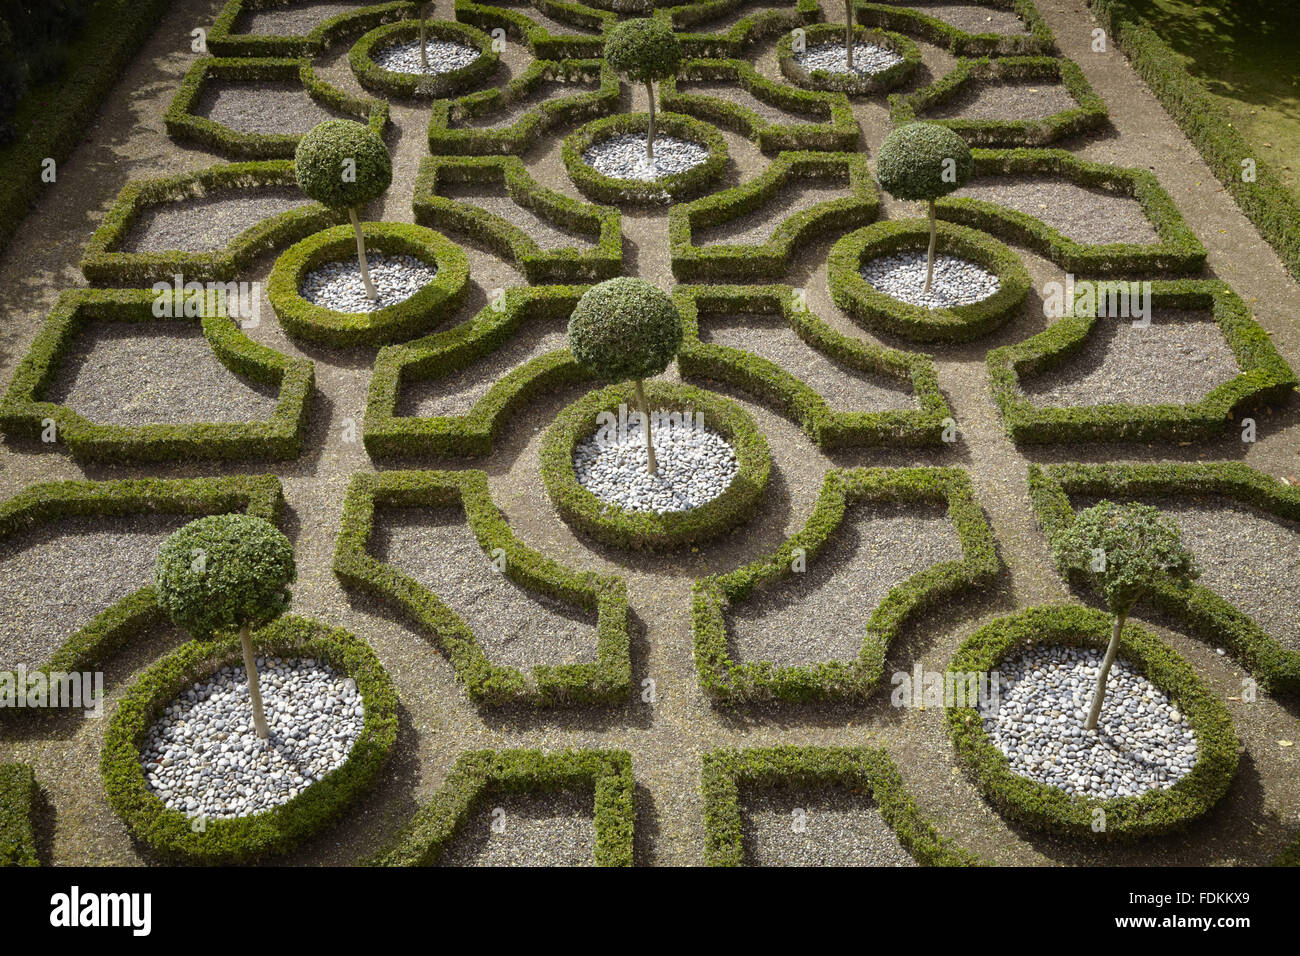 Overhead view of the Knot Garden at Moseley Old Hall, Staffordshire. Stock Photo